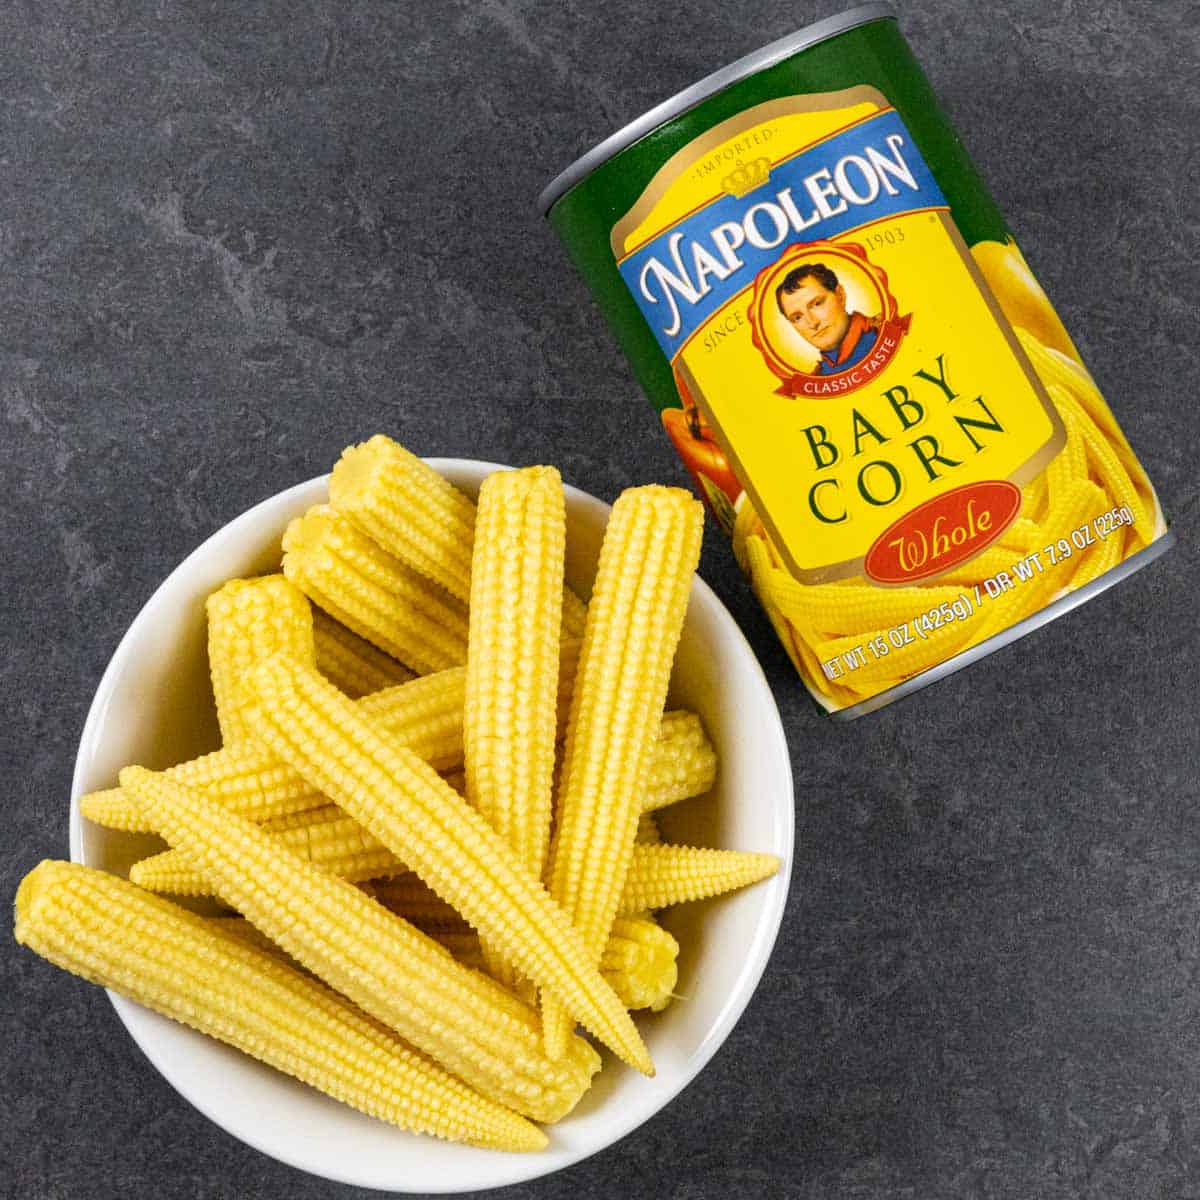 Small white bowl of whole canned baby corn cobs on a grey board next to the can showing its front label.